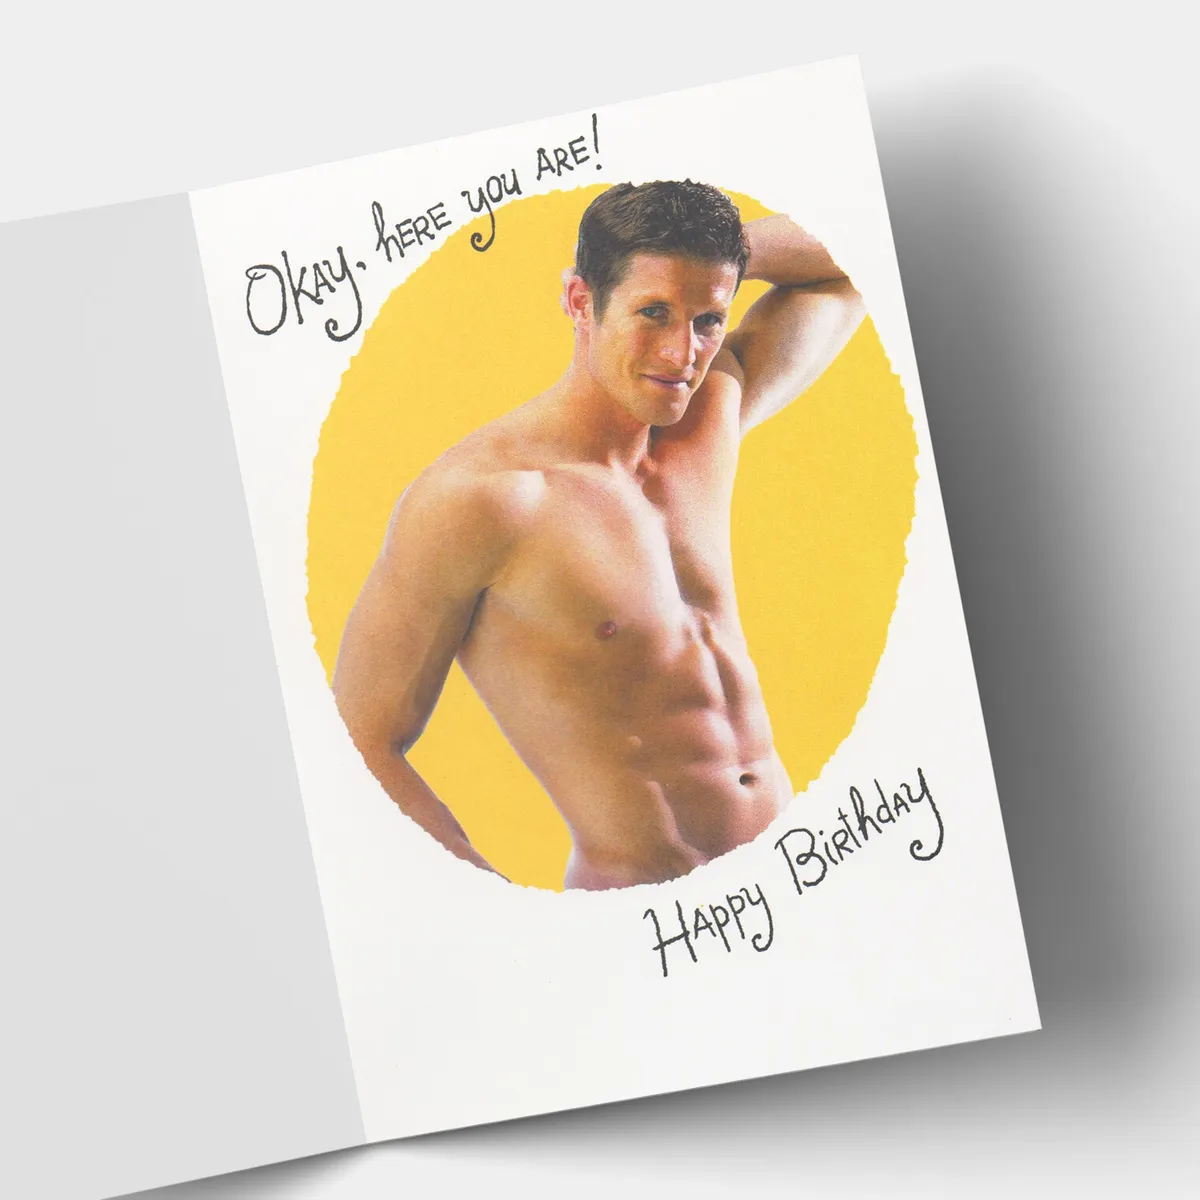 ashley postell recommends happy birthday nude man pic